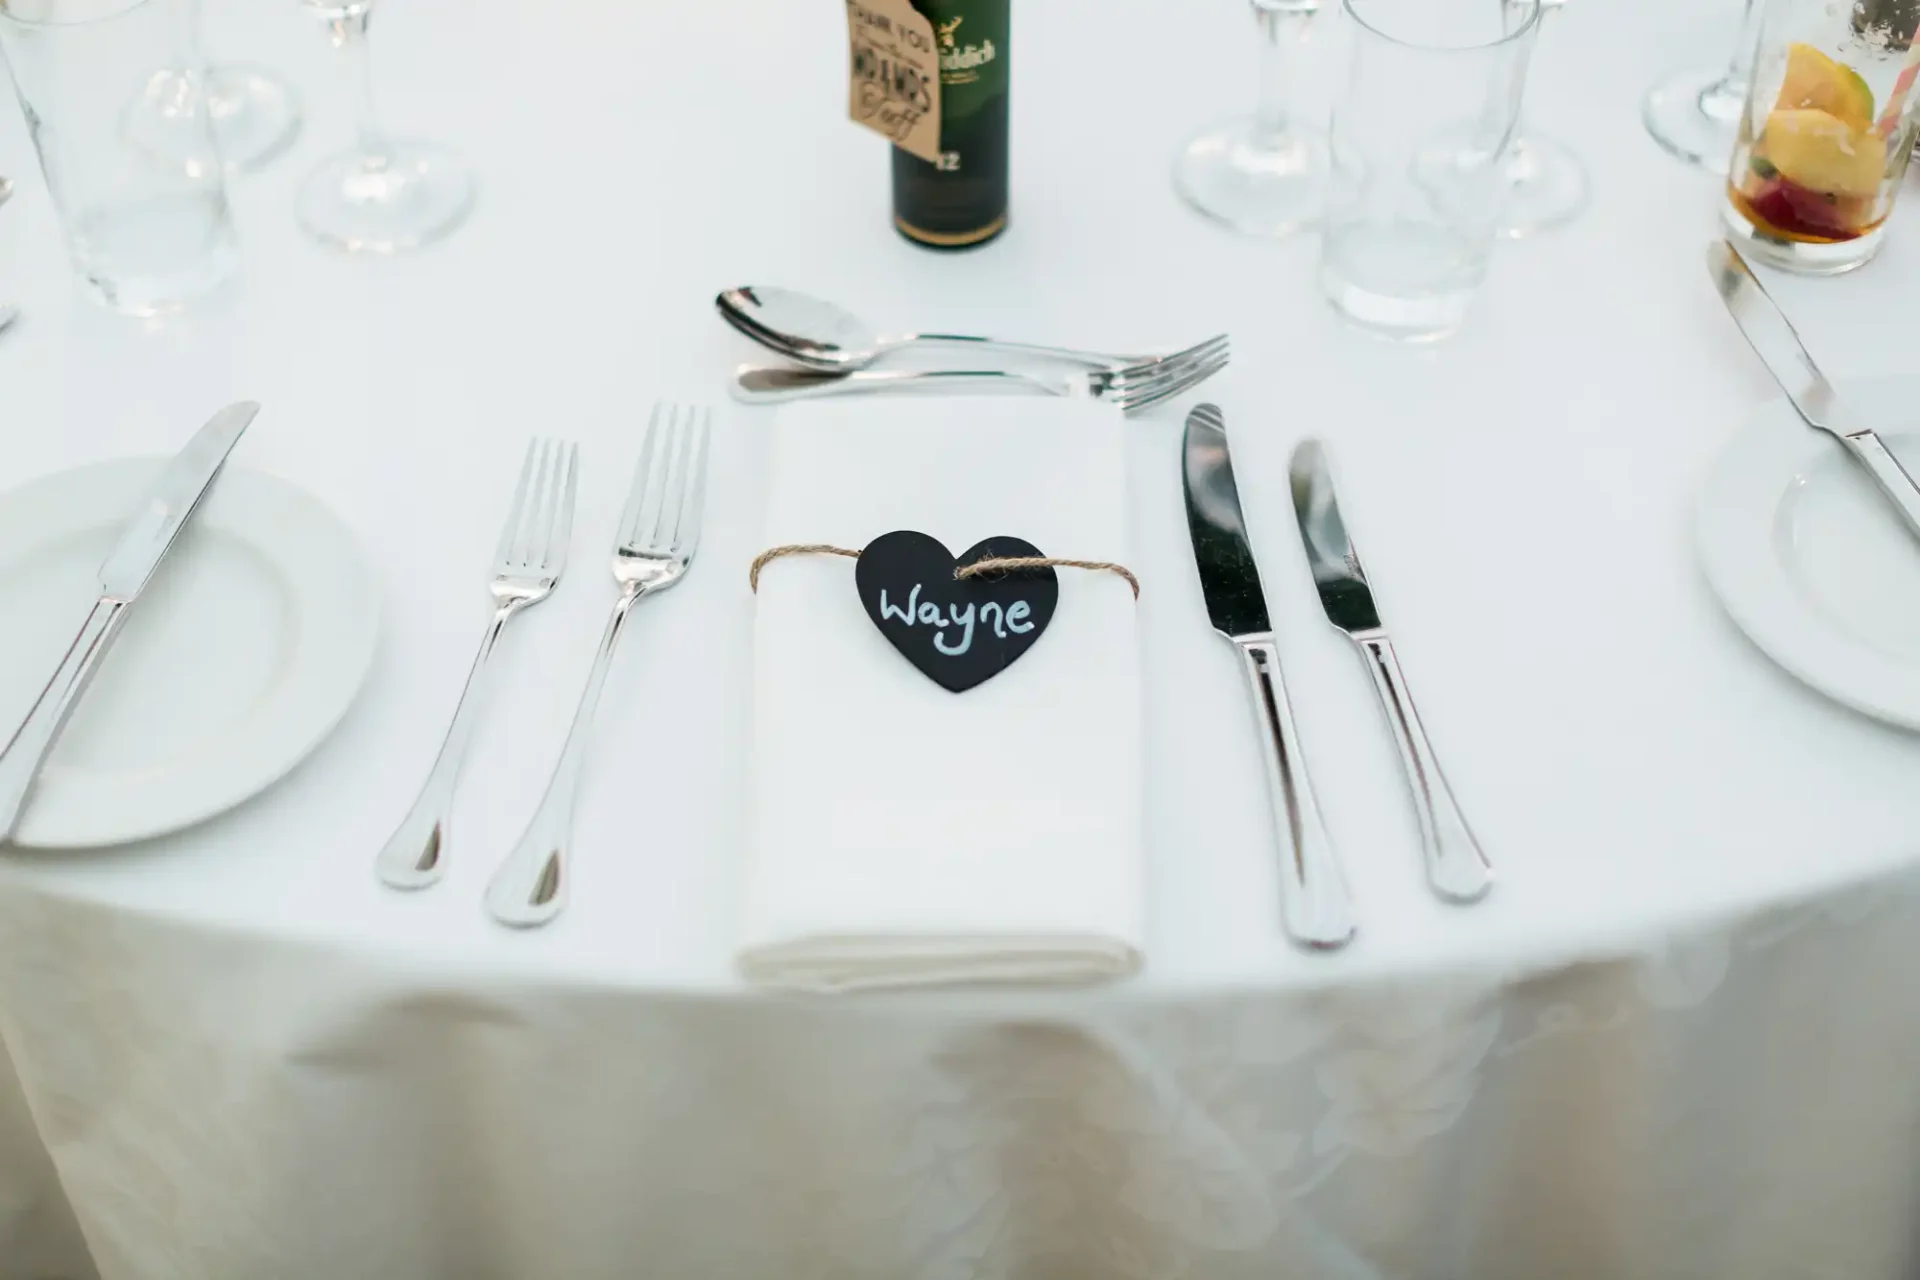 Elegant table setting with plates, glasses, cutlery, and a napkin tagged with a heart-shaped name card reading "wayne.